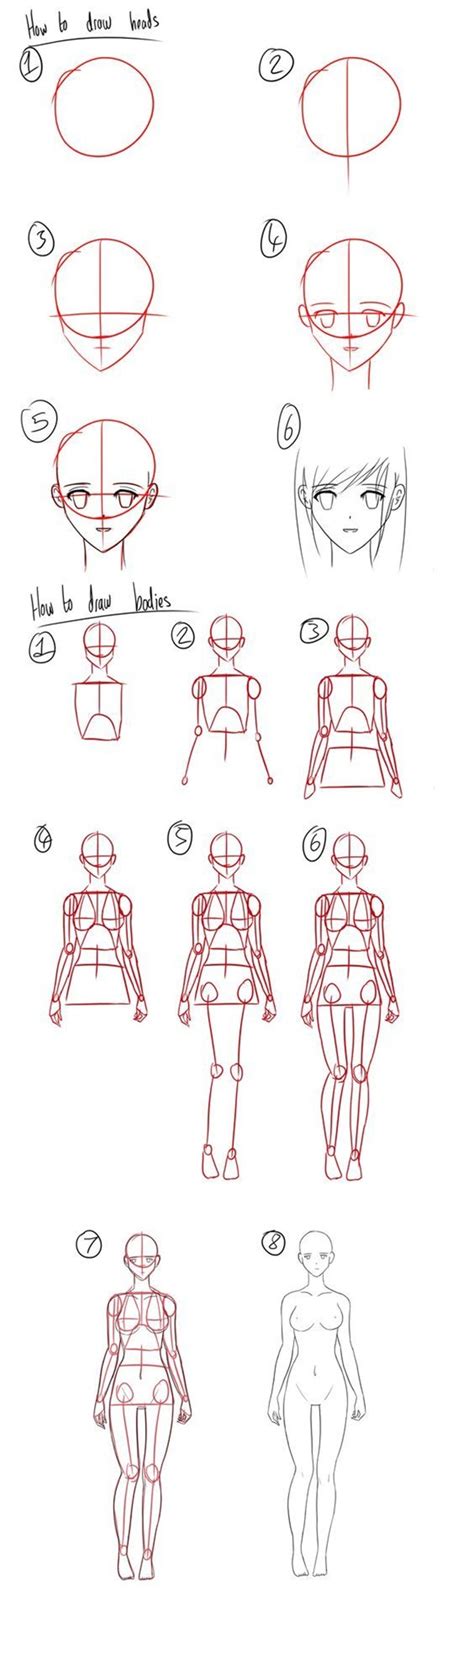 How To Draw Anime Step By Step For Beginners How To Draw An Anime Boy